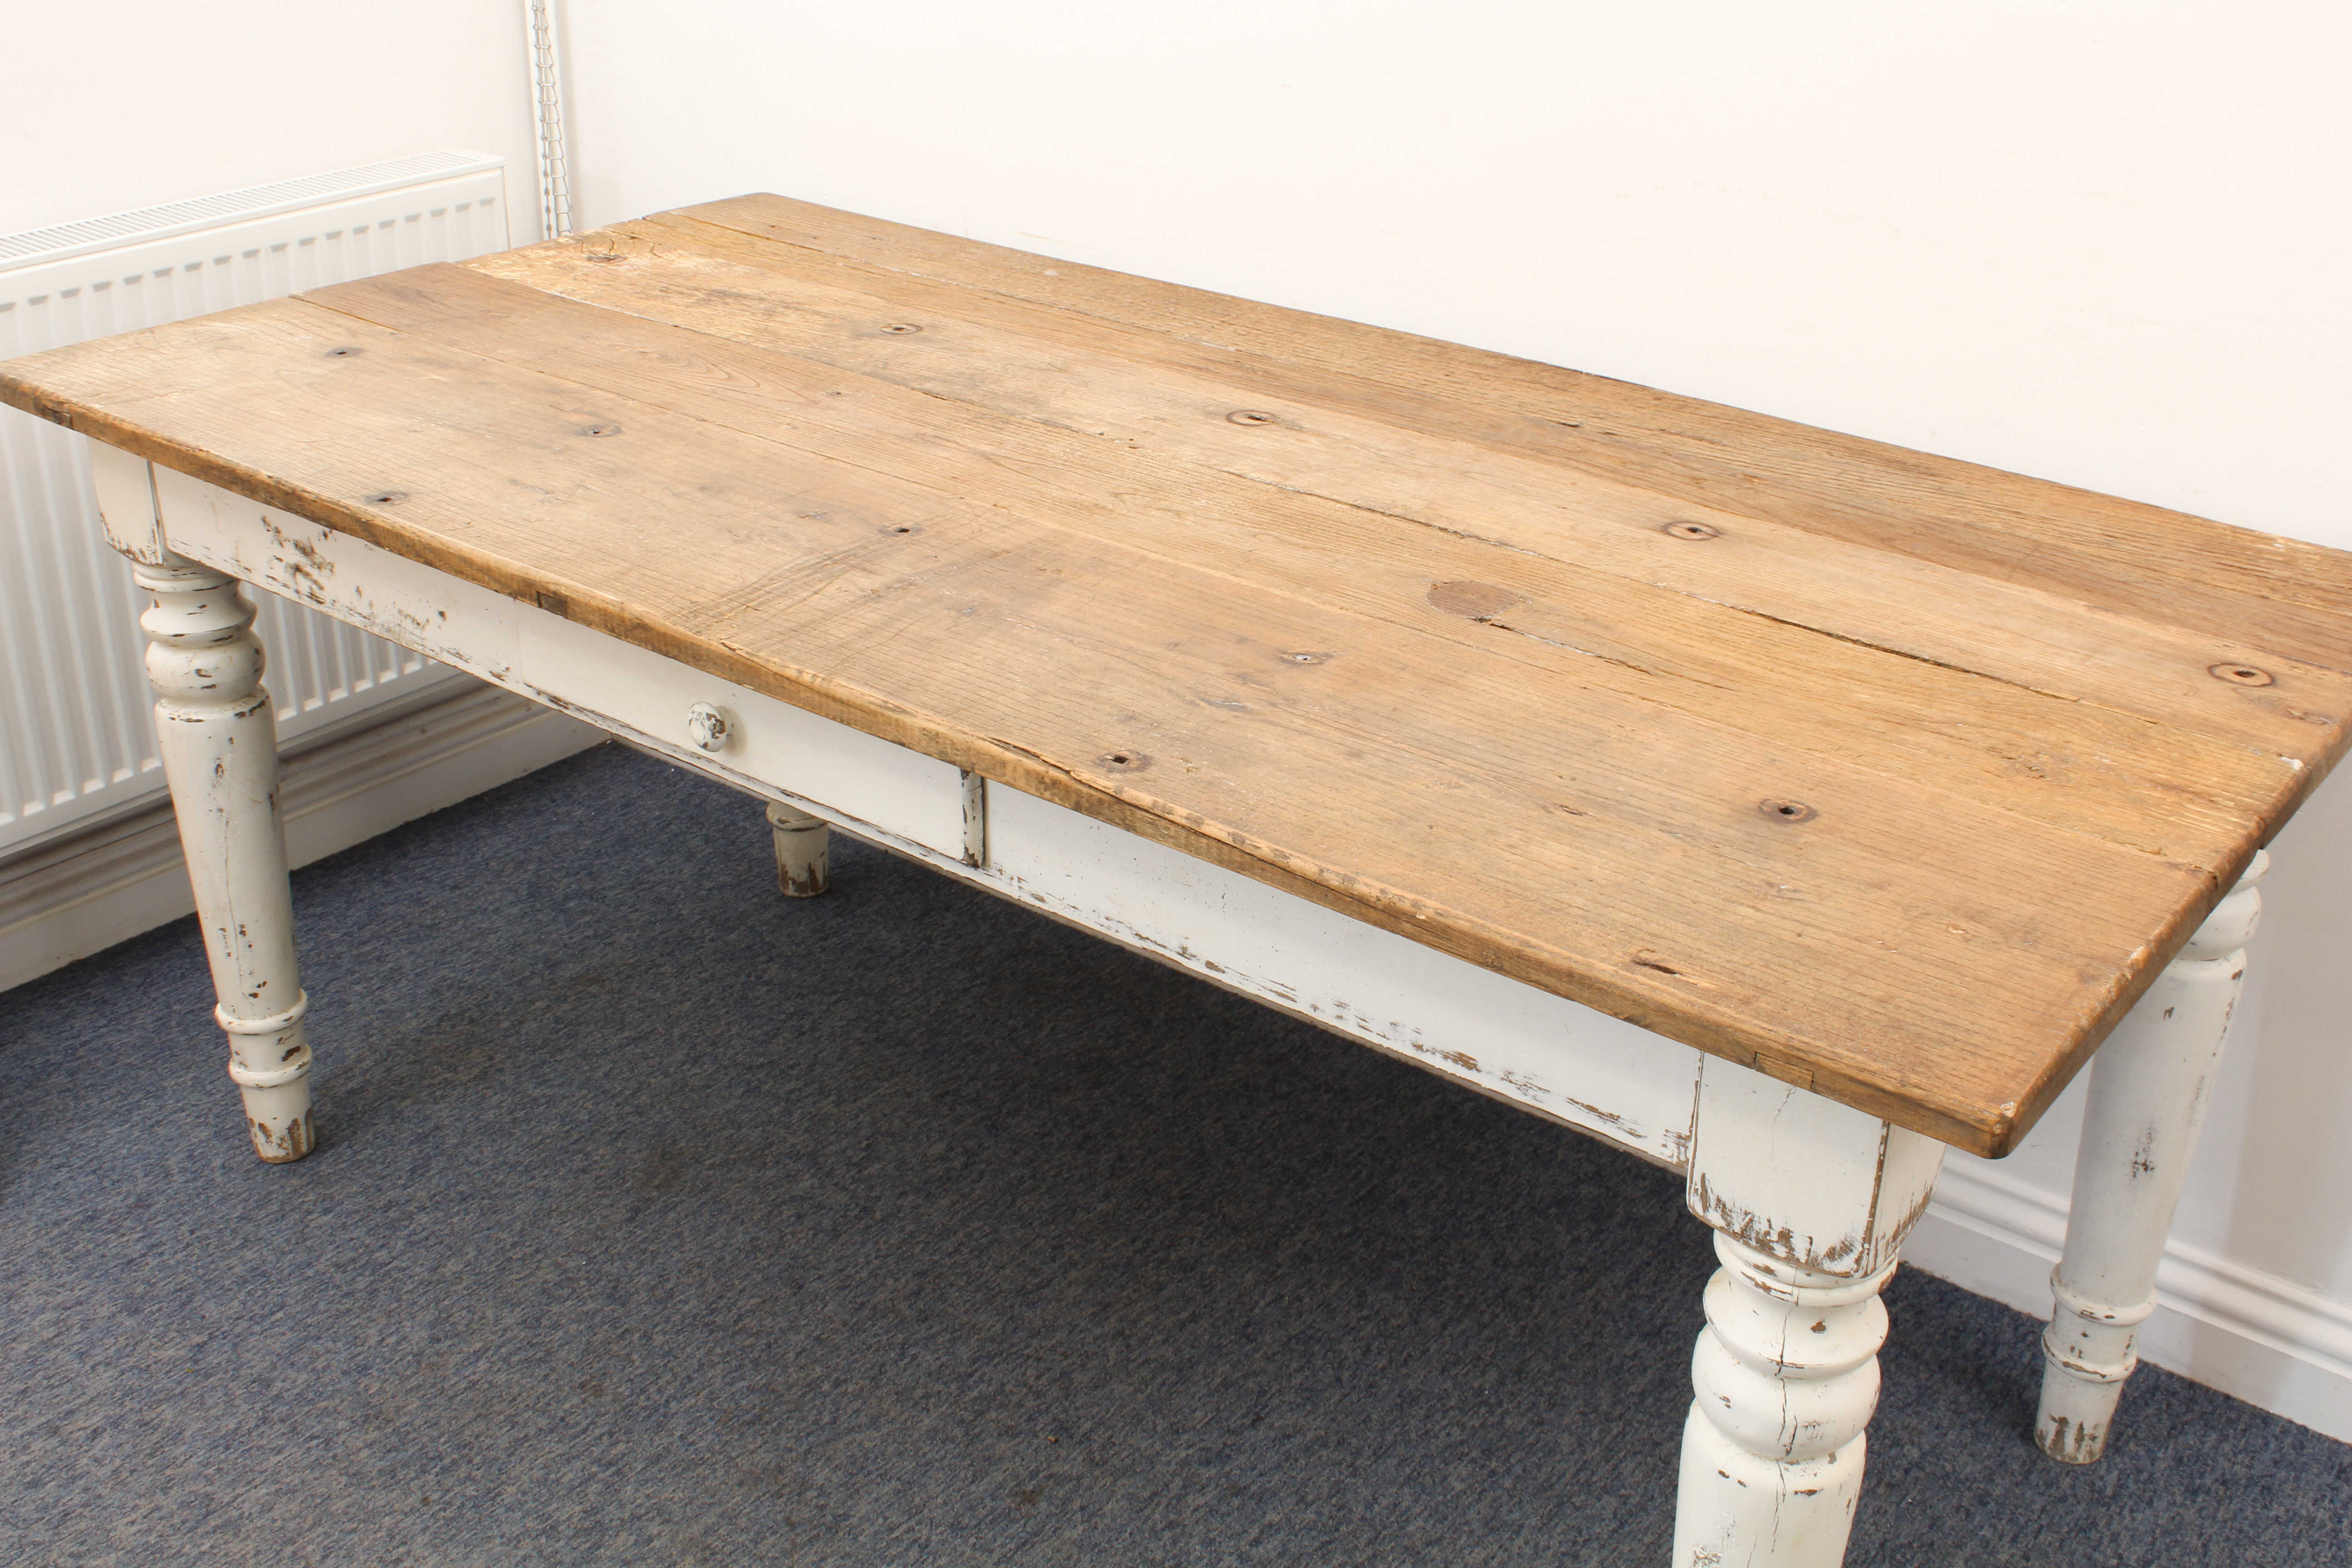 An oak farmhouse kitchen dining table in 19th century style - the rustic, planked top raised on an - Bild 3 aus 7